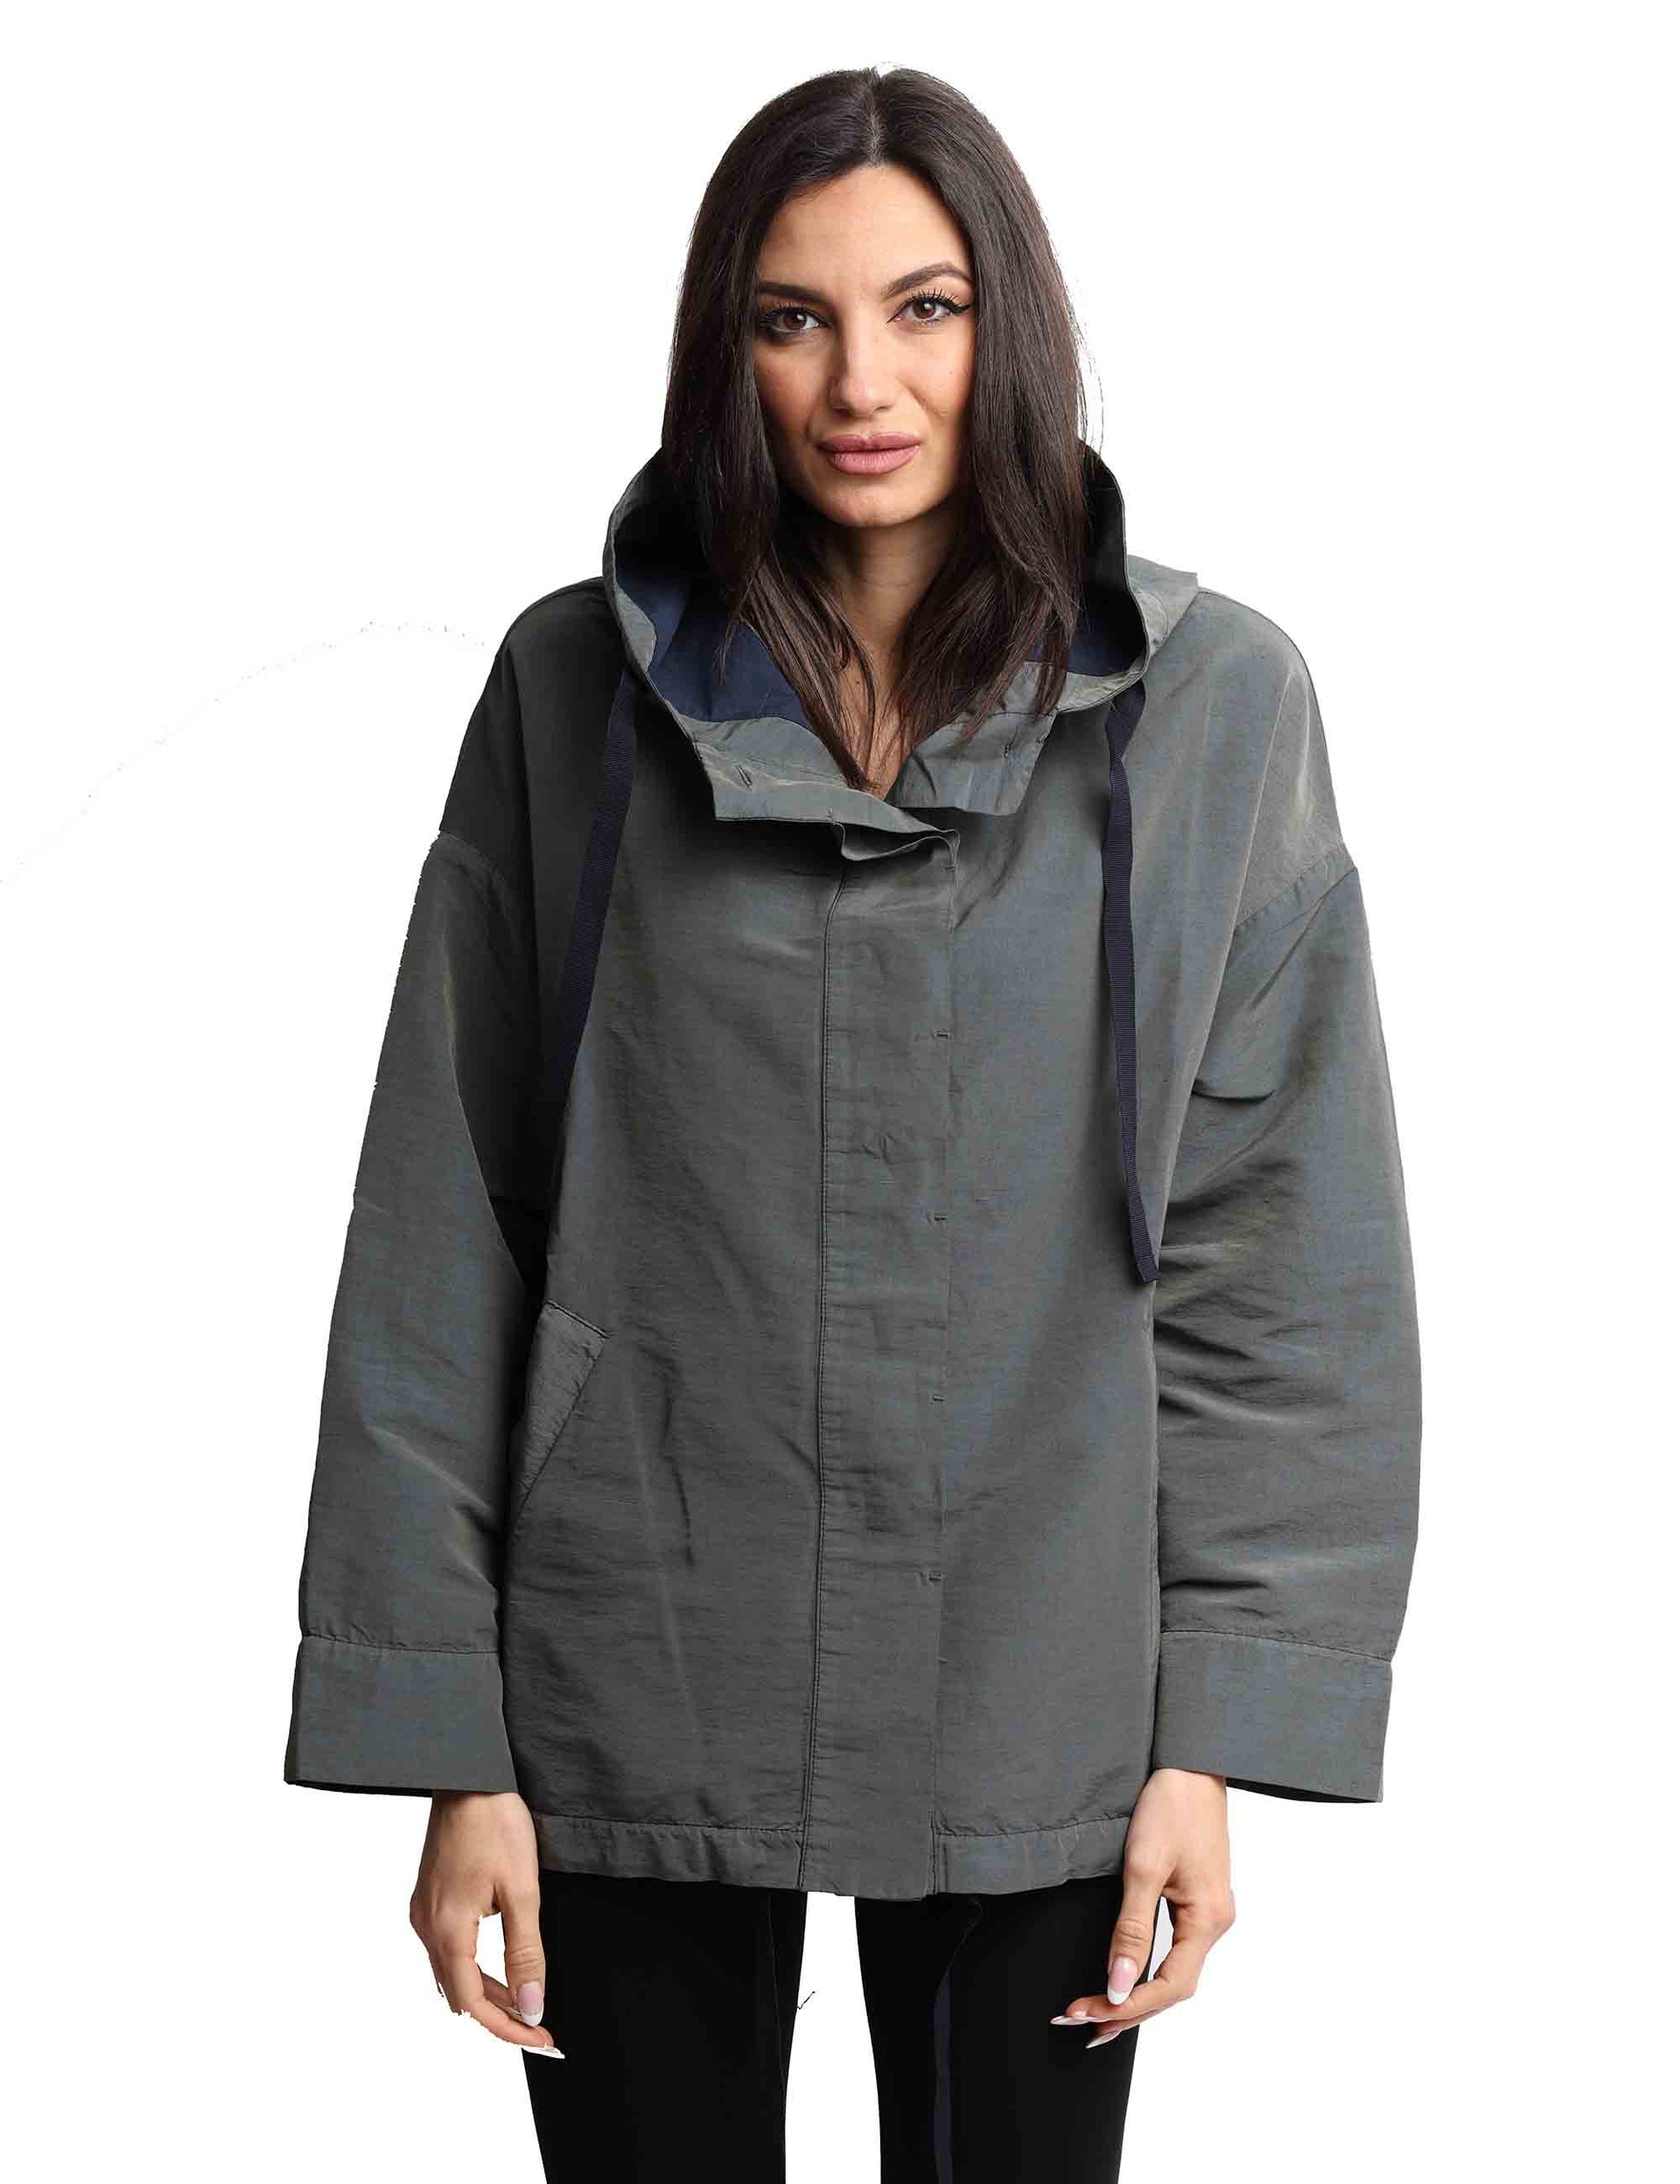 Women's jackets in blue cotton and linen blend with hood